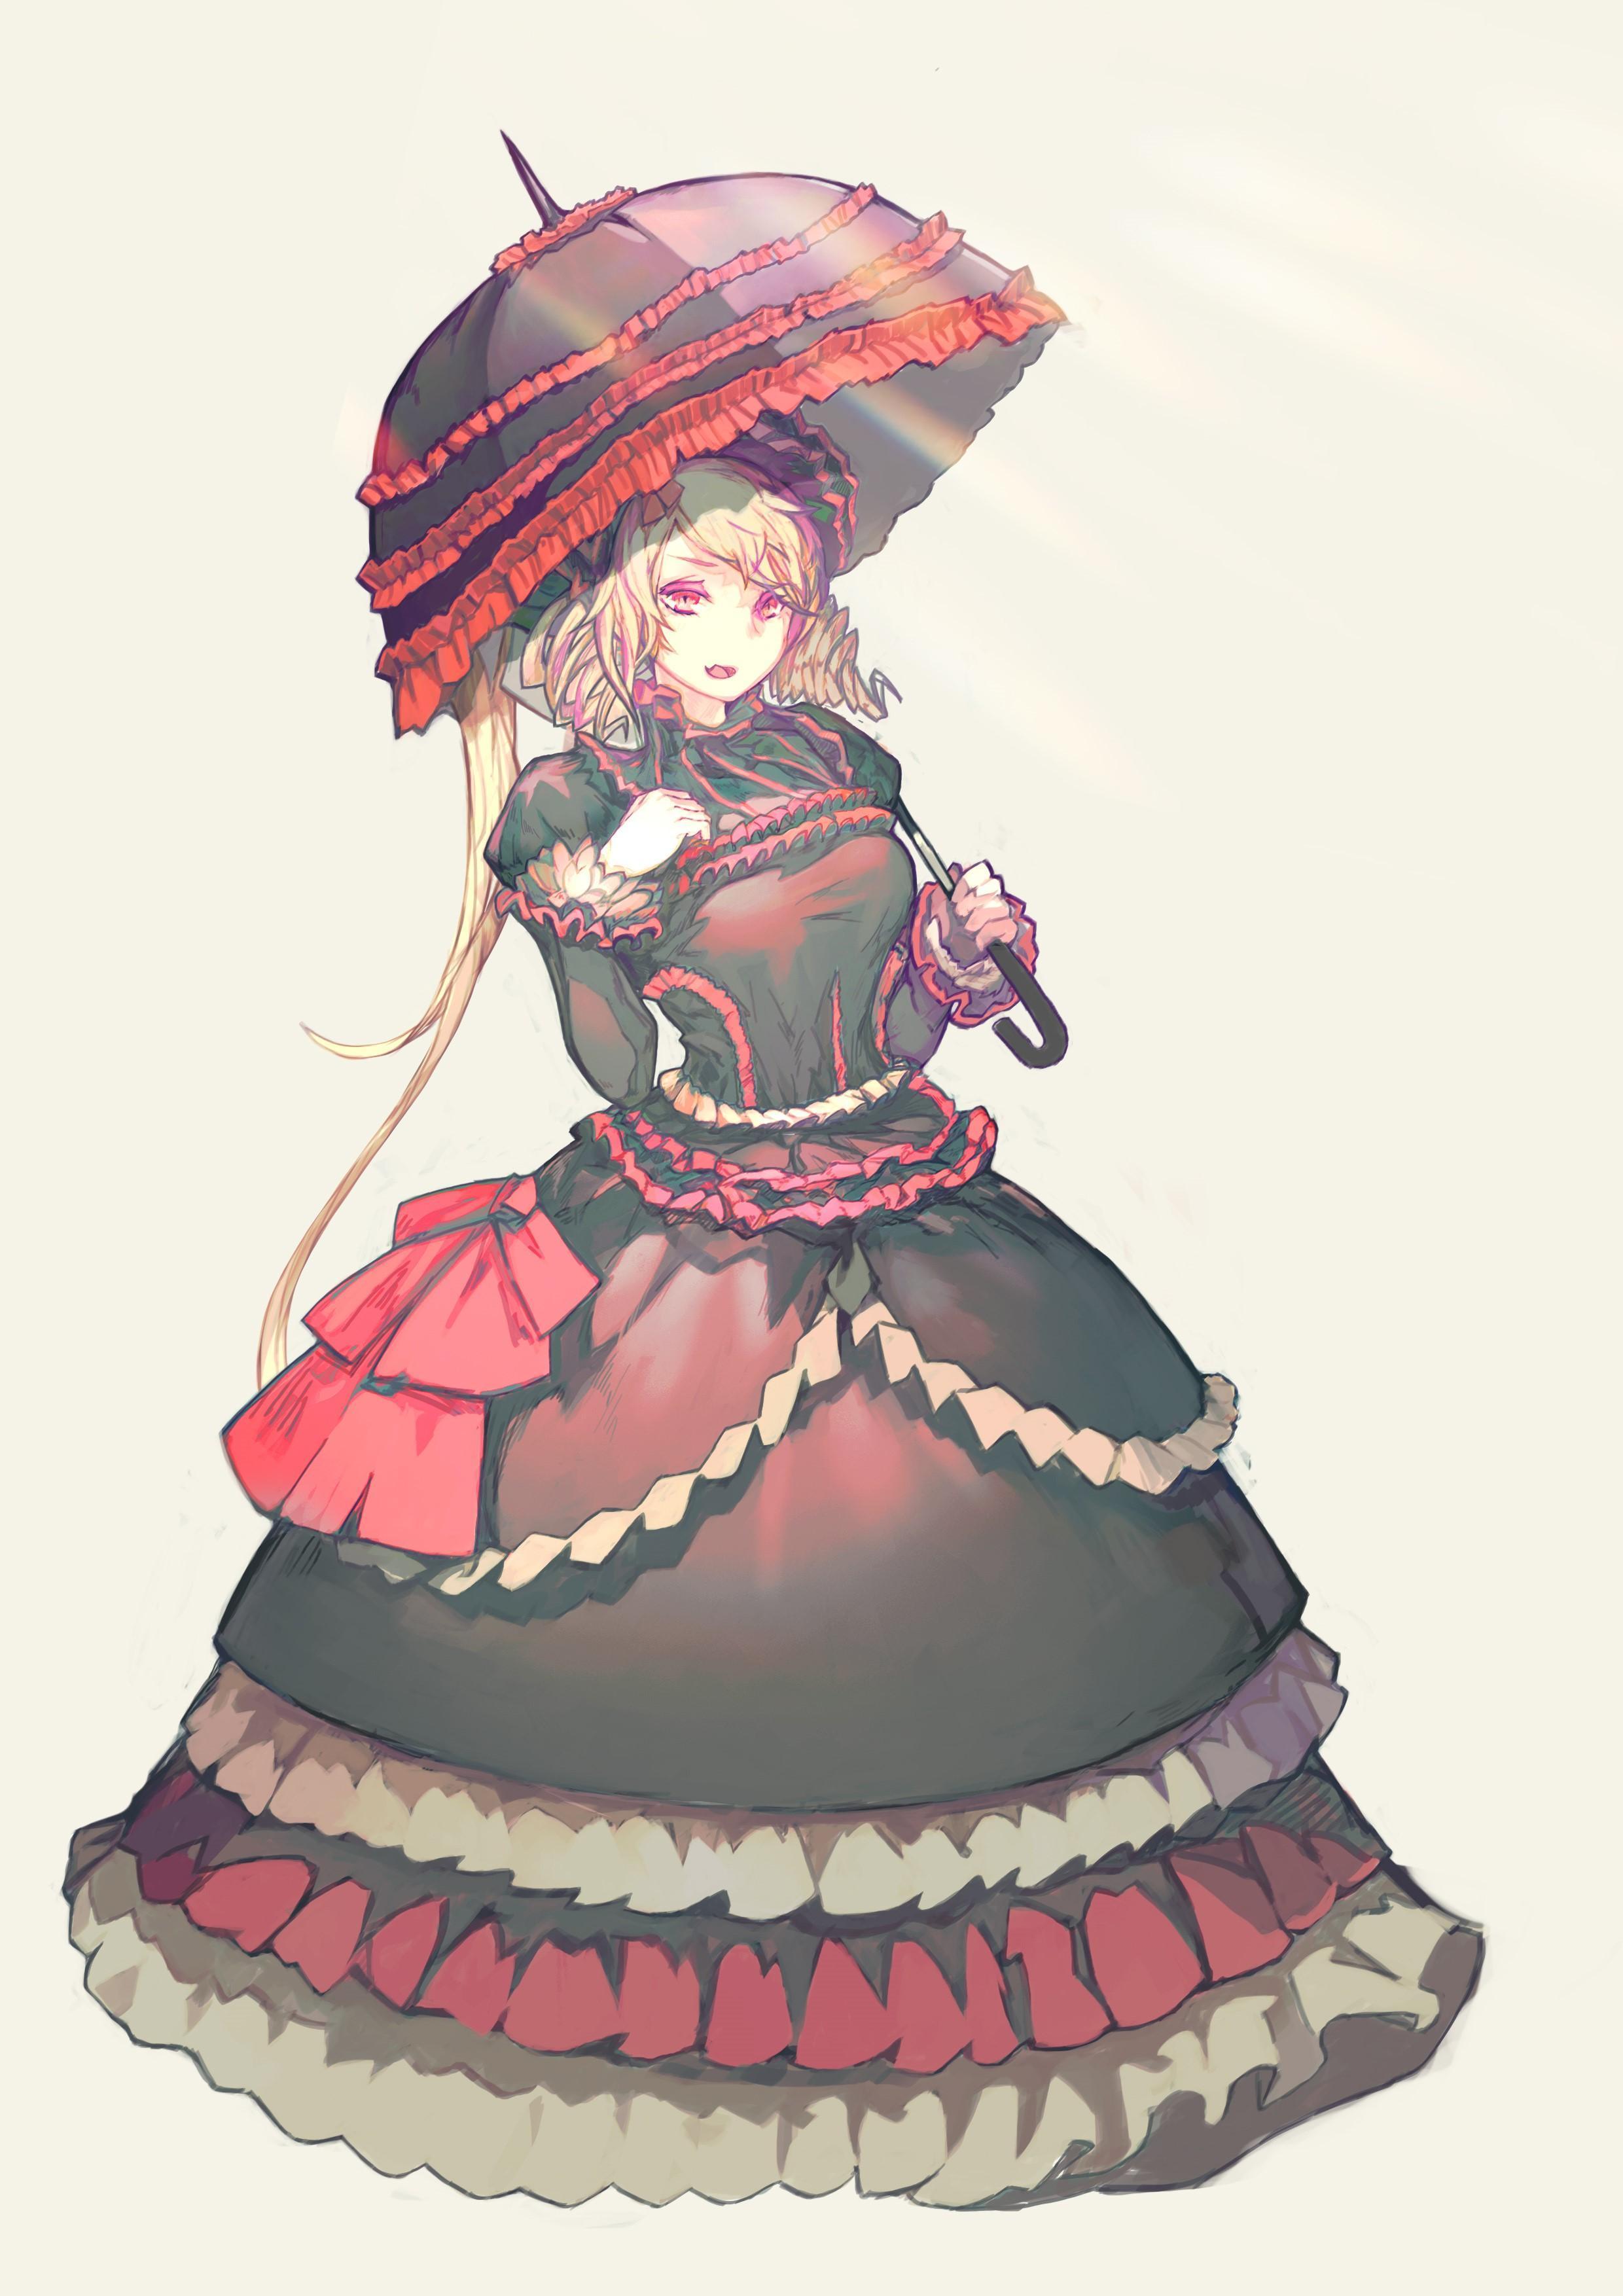 HD wallpaper, Parasol, Red Eyes, Overlord Anime, Anime, 2D, Gothic Lolita, Big Boobs, Long Hair, Frill Dress, Hair In Face, Shalltear Bloodfallen, Pale, Anime Girls, Women With Umbrella, Hand On Chest, Fan Art, Bangs, Ponytail, Vampires, Silver Hair, Simple Background, Open Mouth, Black Dress, Vertical, Loli, Curvy, Monster Girl, Hair Bows, Drill Hair, Looking At Viewer